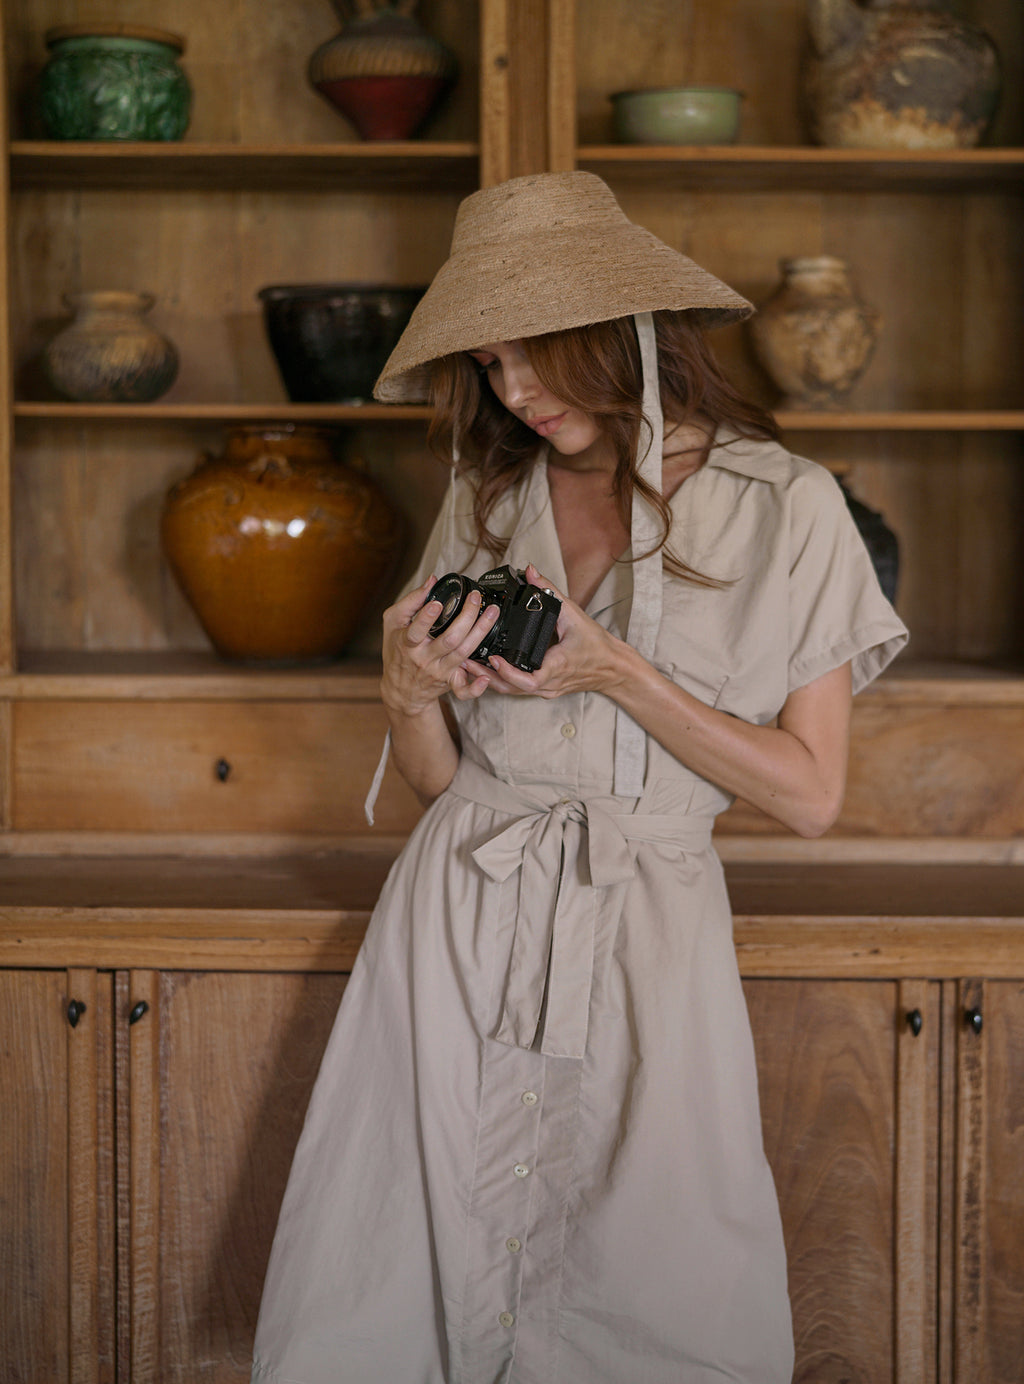 Reign Jute Straw Hat in Nude Beige. REIGN is a classic multi-functional hat with downturned brim made with natural jute straw and a modern structural shape. This hat is made to accompany you from the great outdoors to chic dinner and anywhere you travel in between.